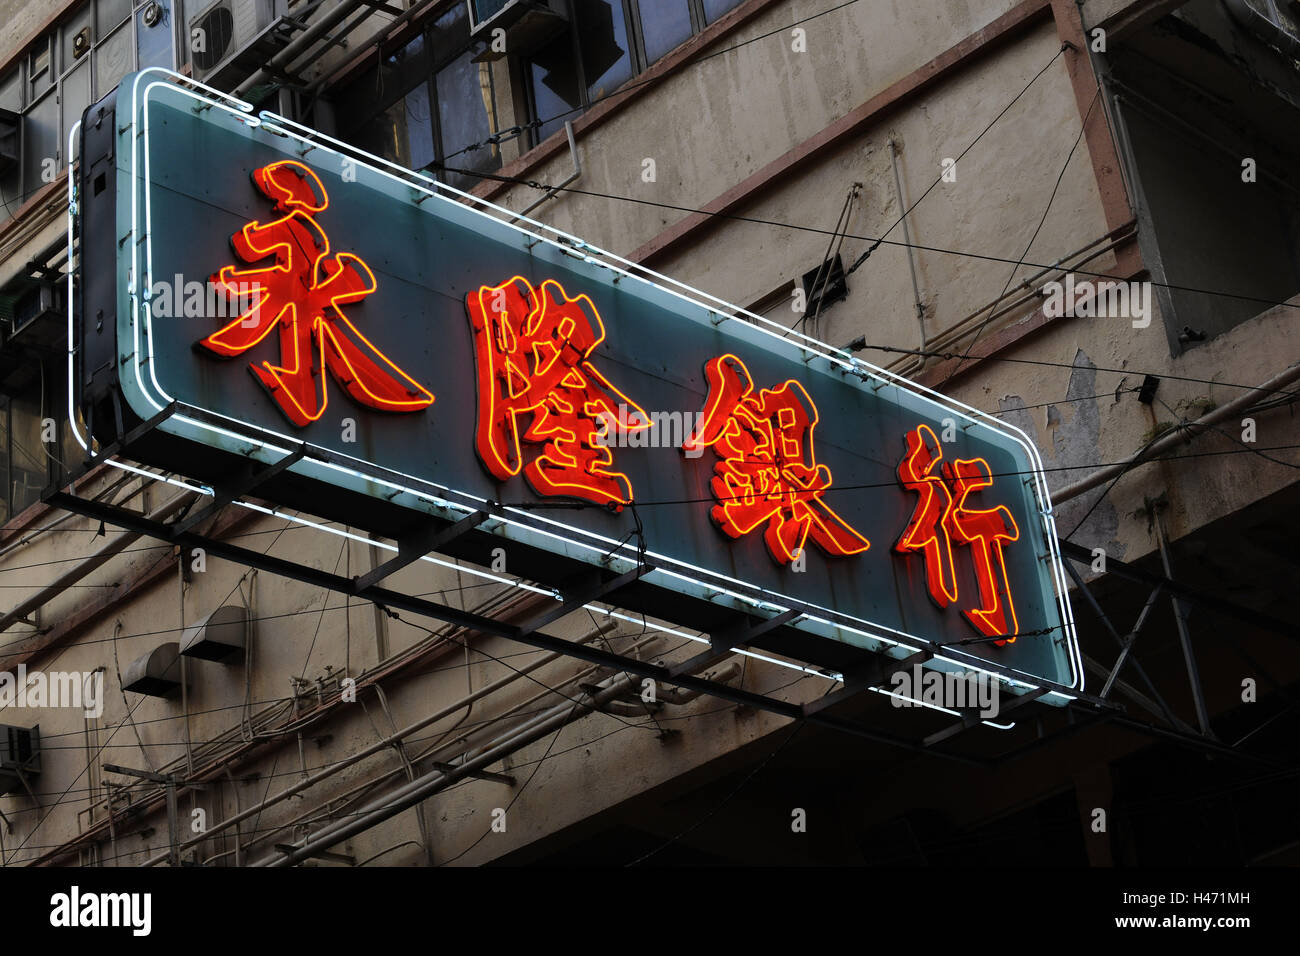 Neon Lights Figure Font In Chinese Hong Kong China Stock Photo Alamy